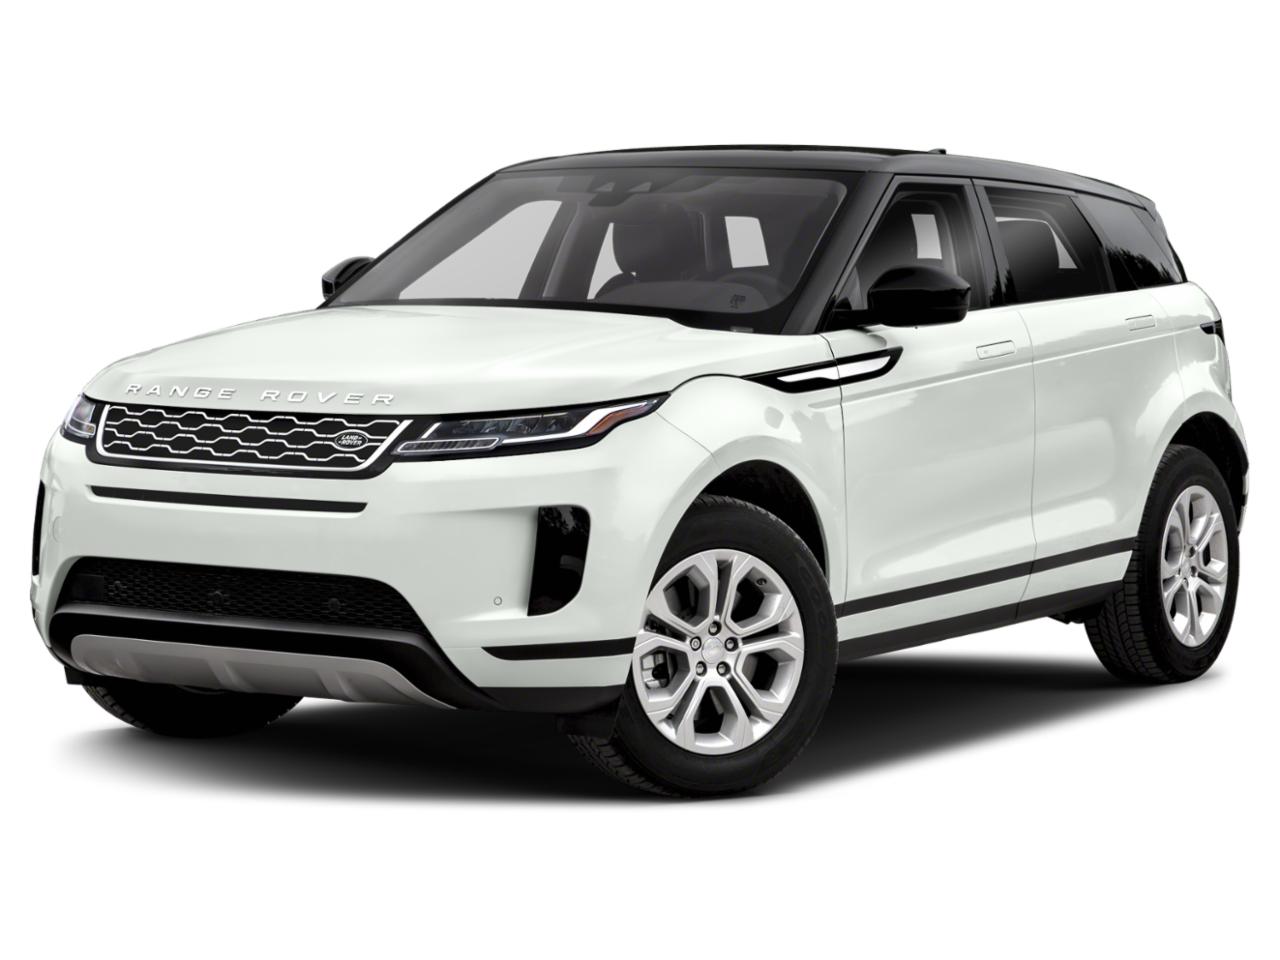 2020 Land Rover Range Rover Evoque Vehicle Photo in Plainfield, IL 60586